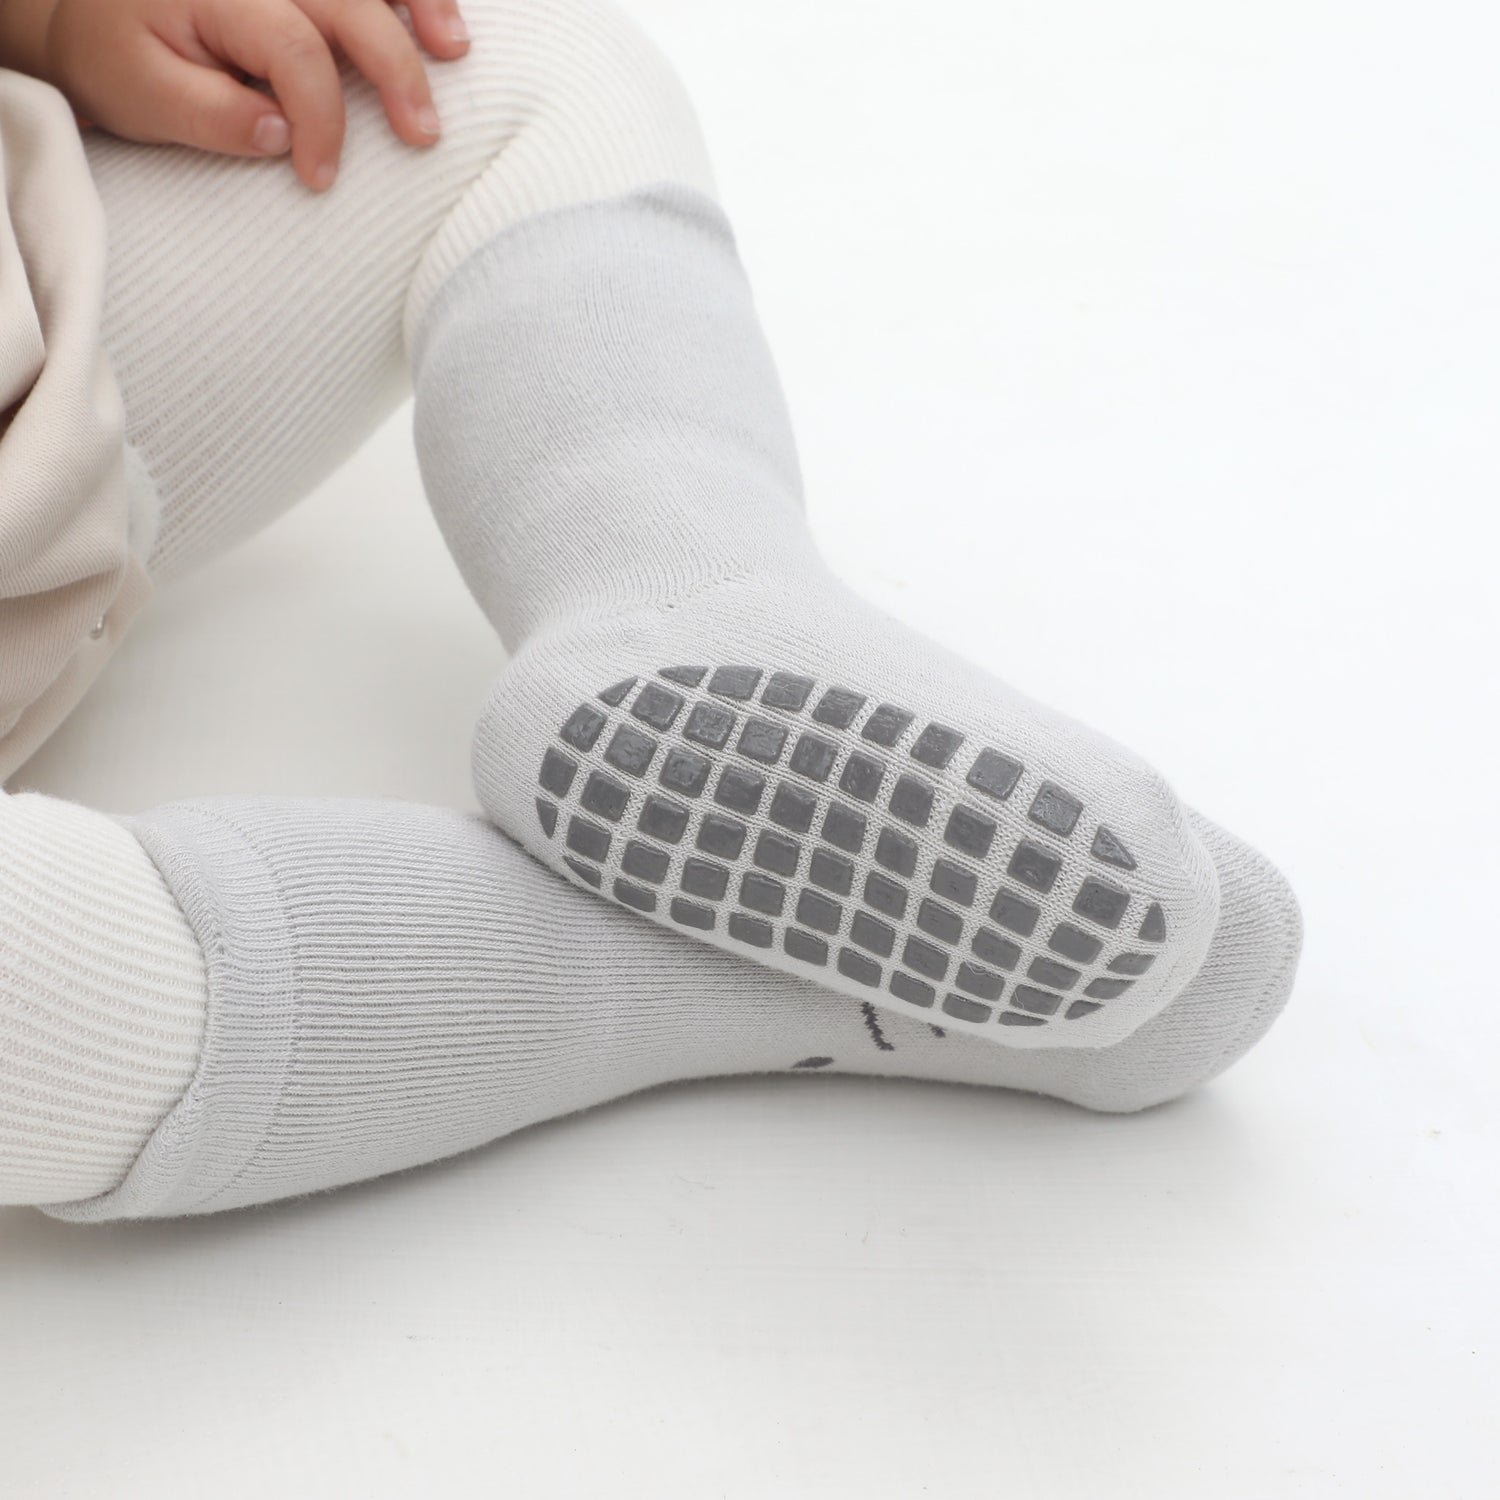 Fun grips on colorful kids' socks make for exciting and safe indoor adventures.